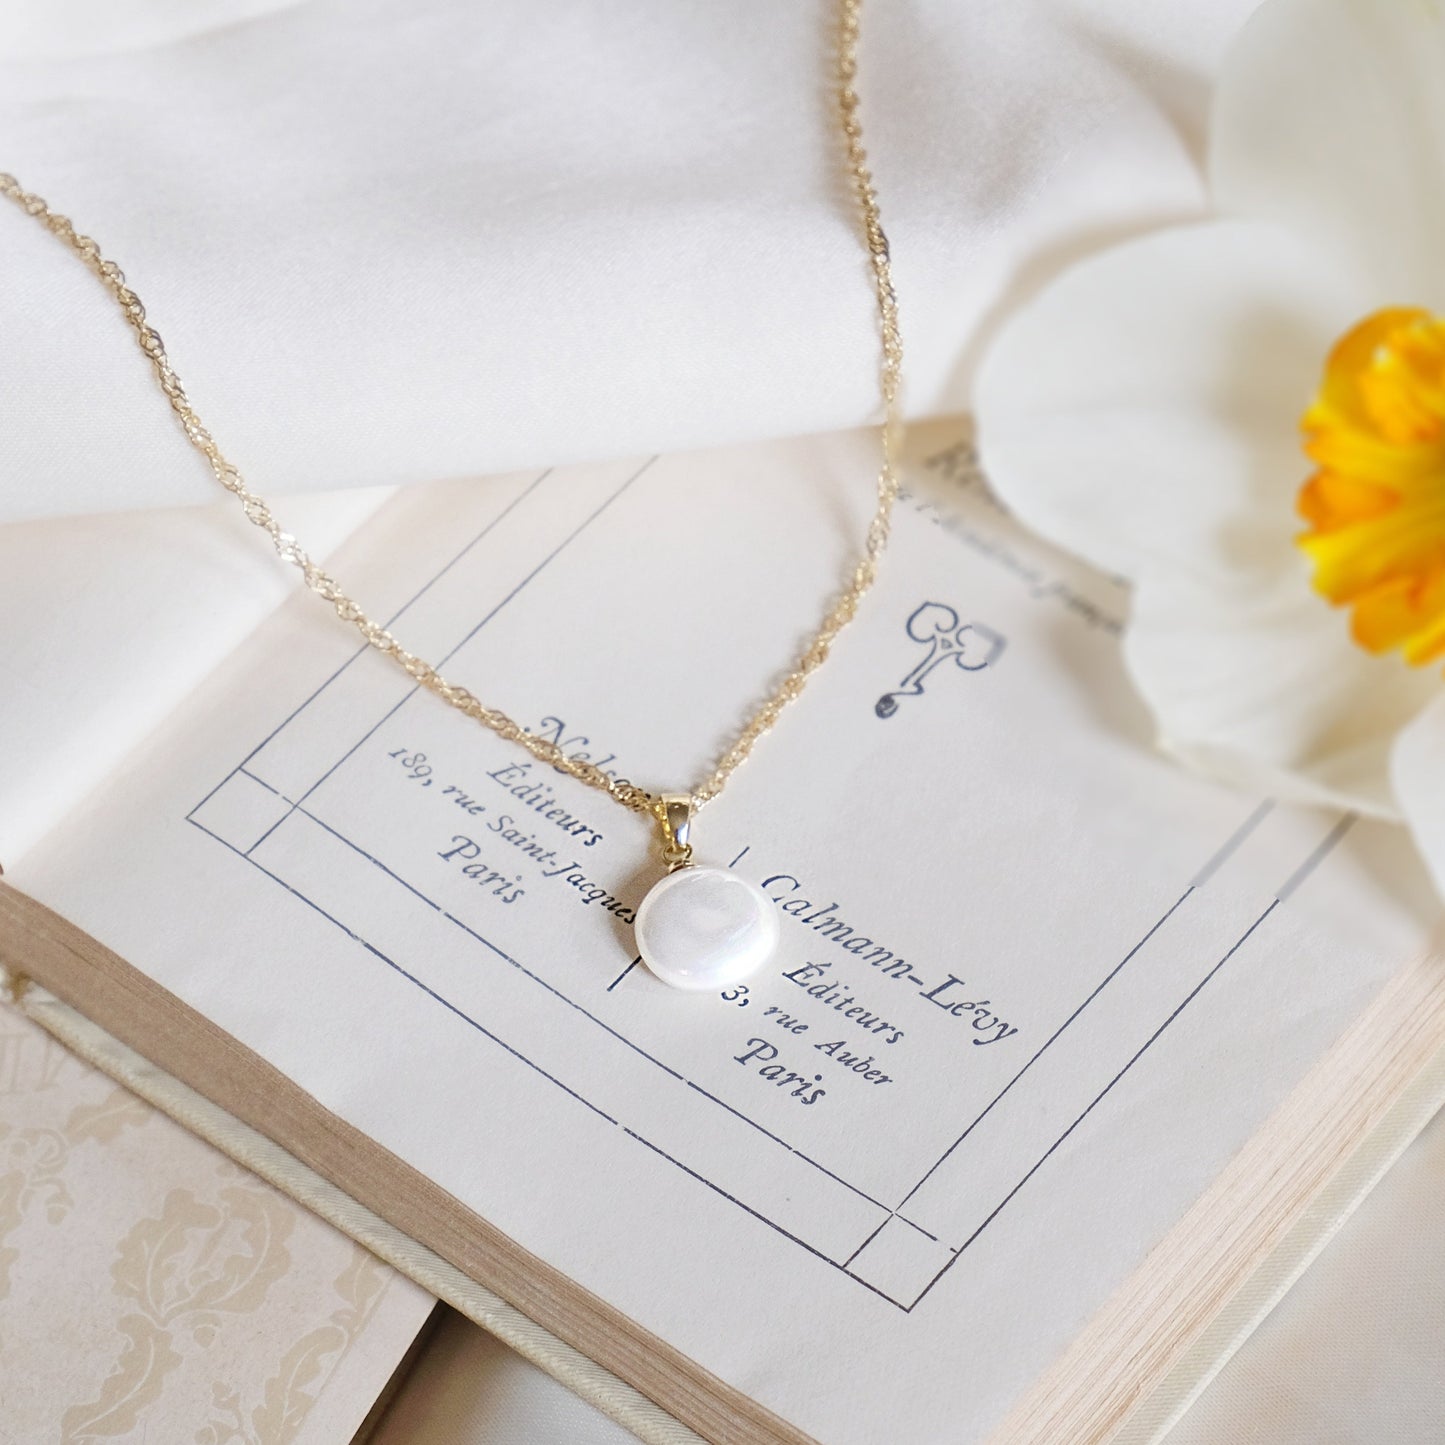 Helen of Troy inspired pearl necklace